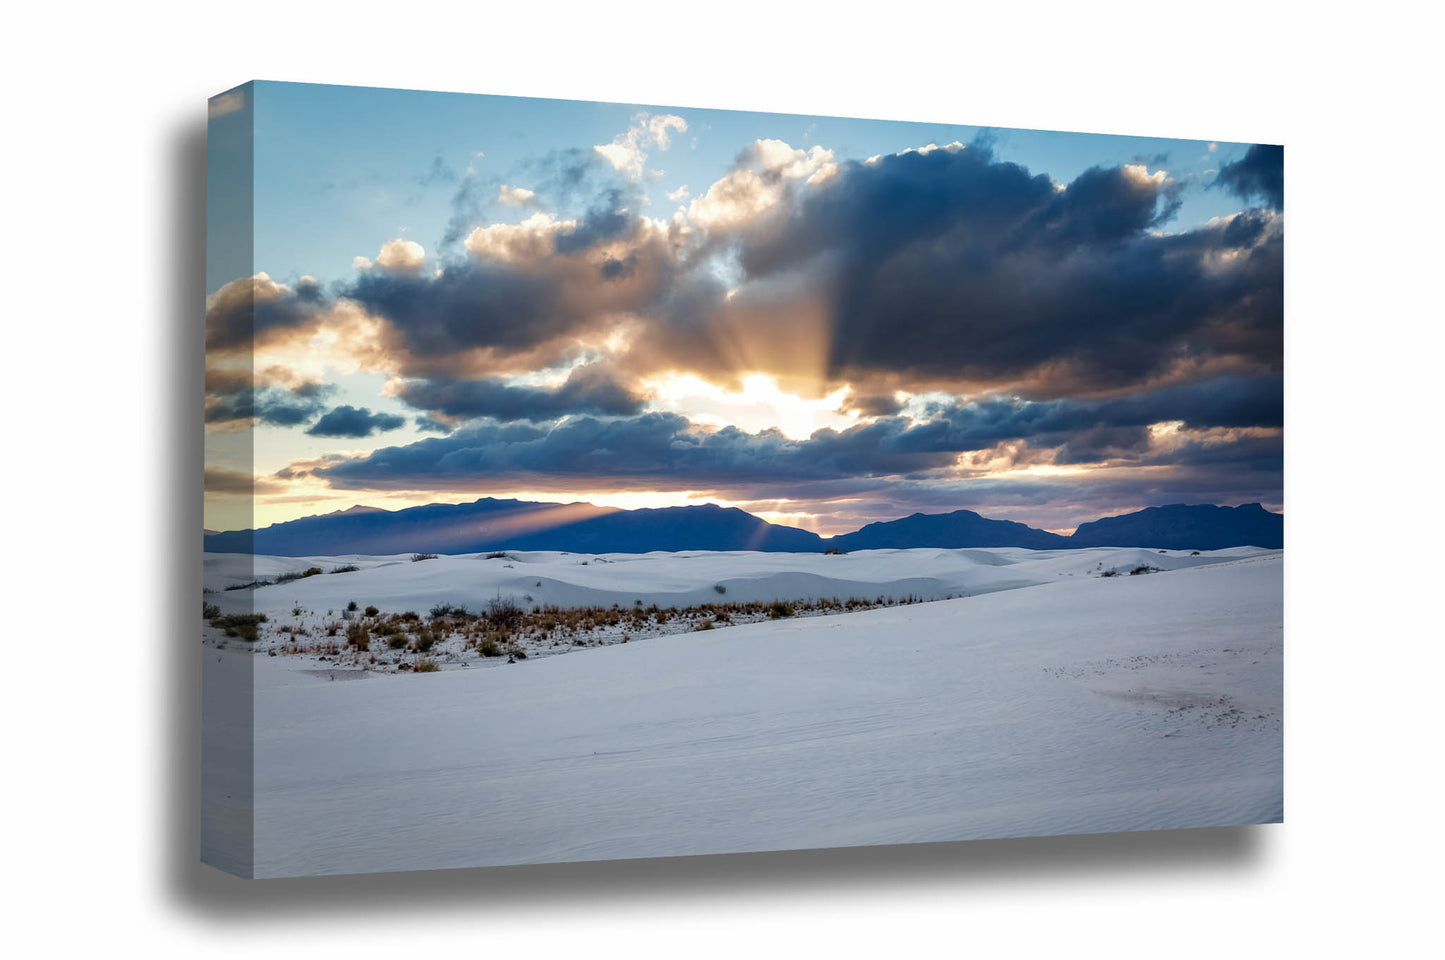 Desert southwest canvas wall art of sunbeams bursting from behind clouds over the San Andres Mountains at sunset at White Sands National Park, New Mexico by Sean Ramsey of Southern Plains Photography.